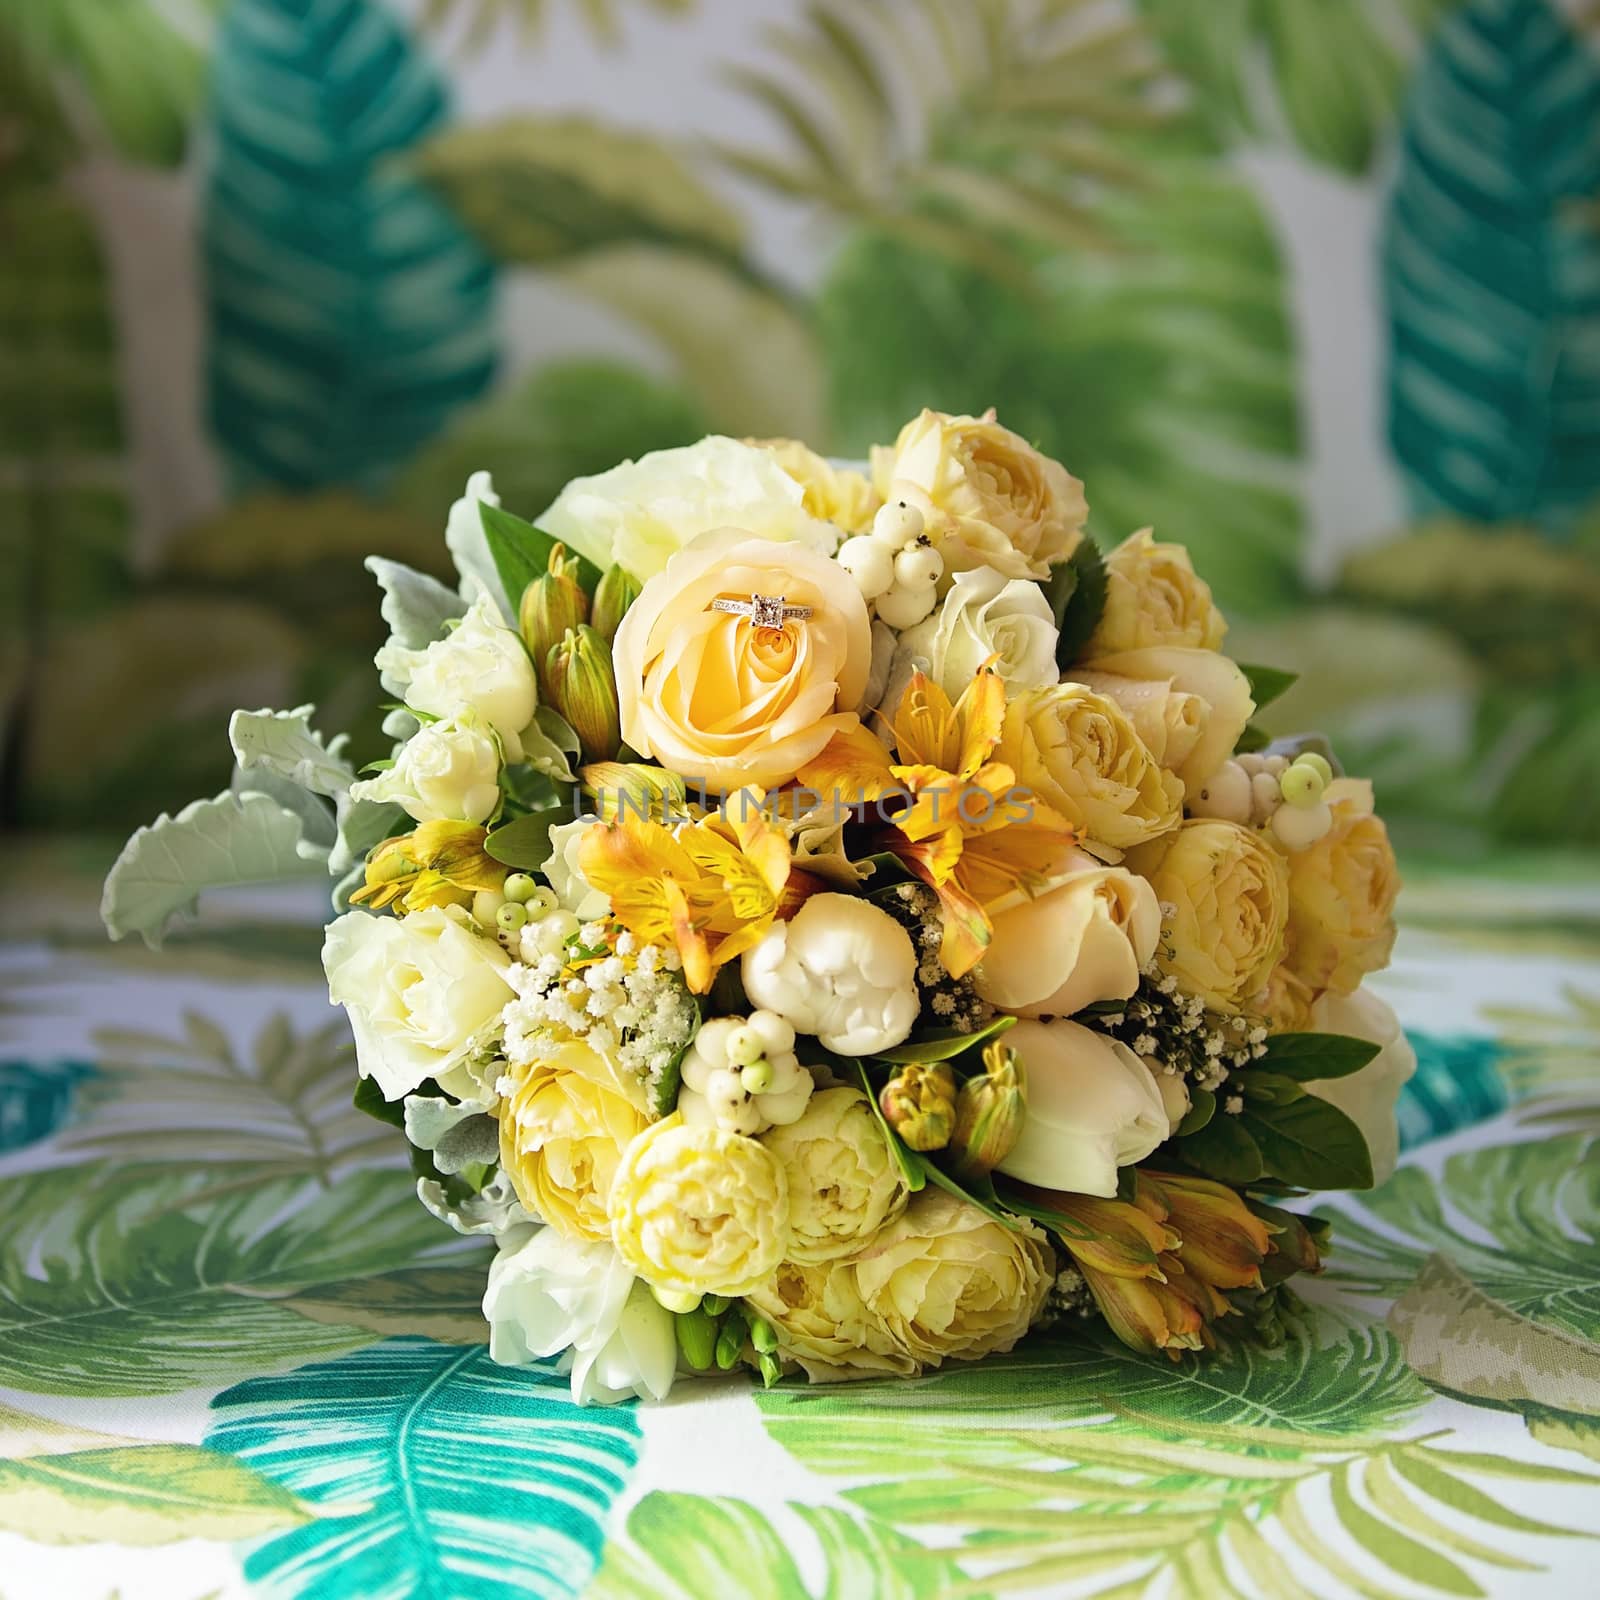 A Floral Bridal Bouquet Of Yellow Blooms by 	JacksonStock